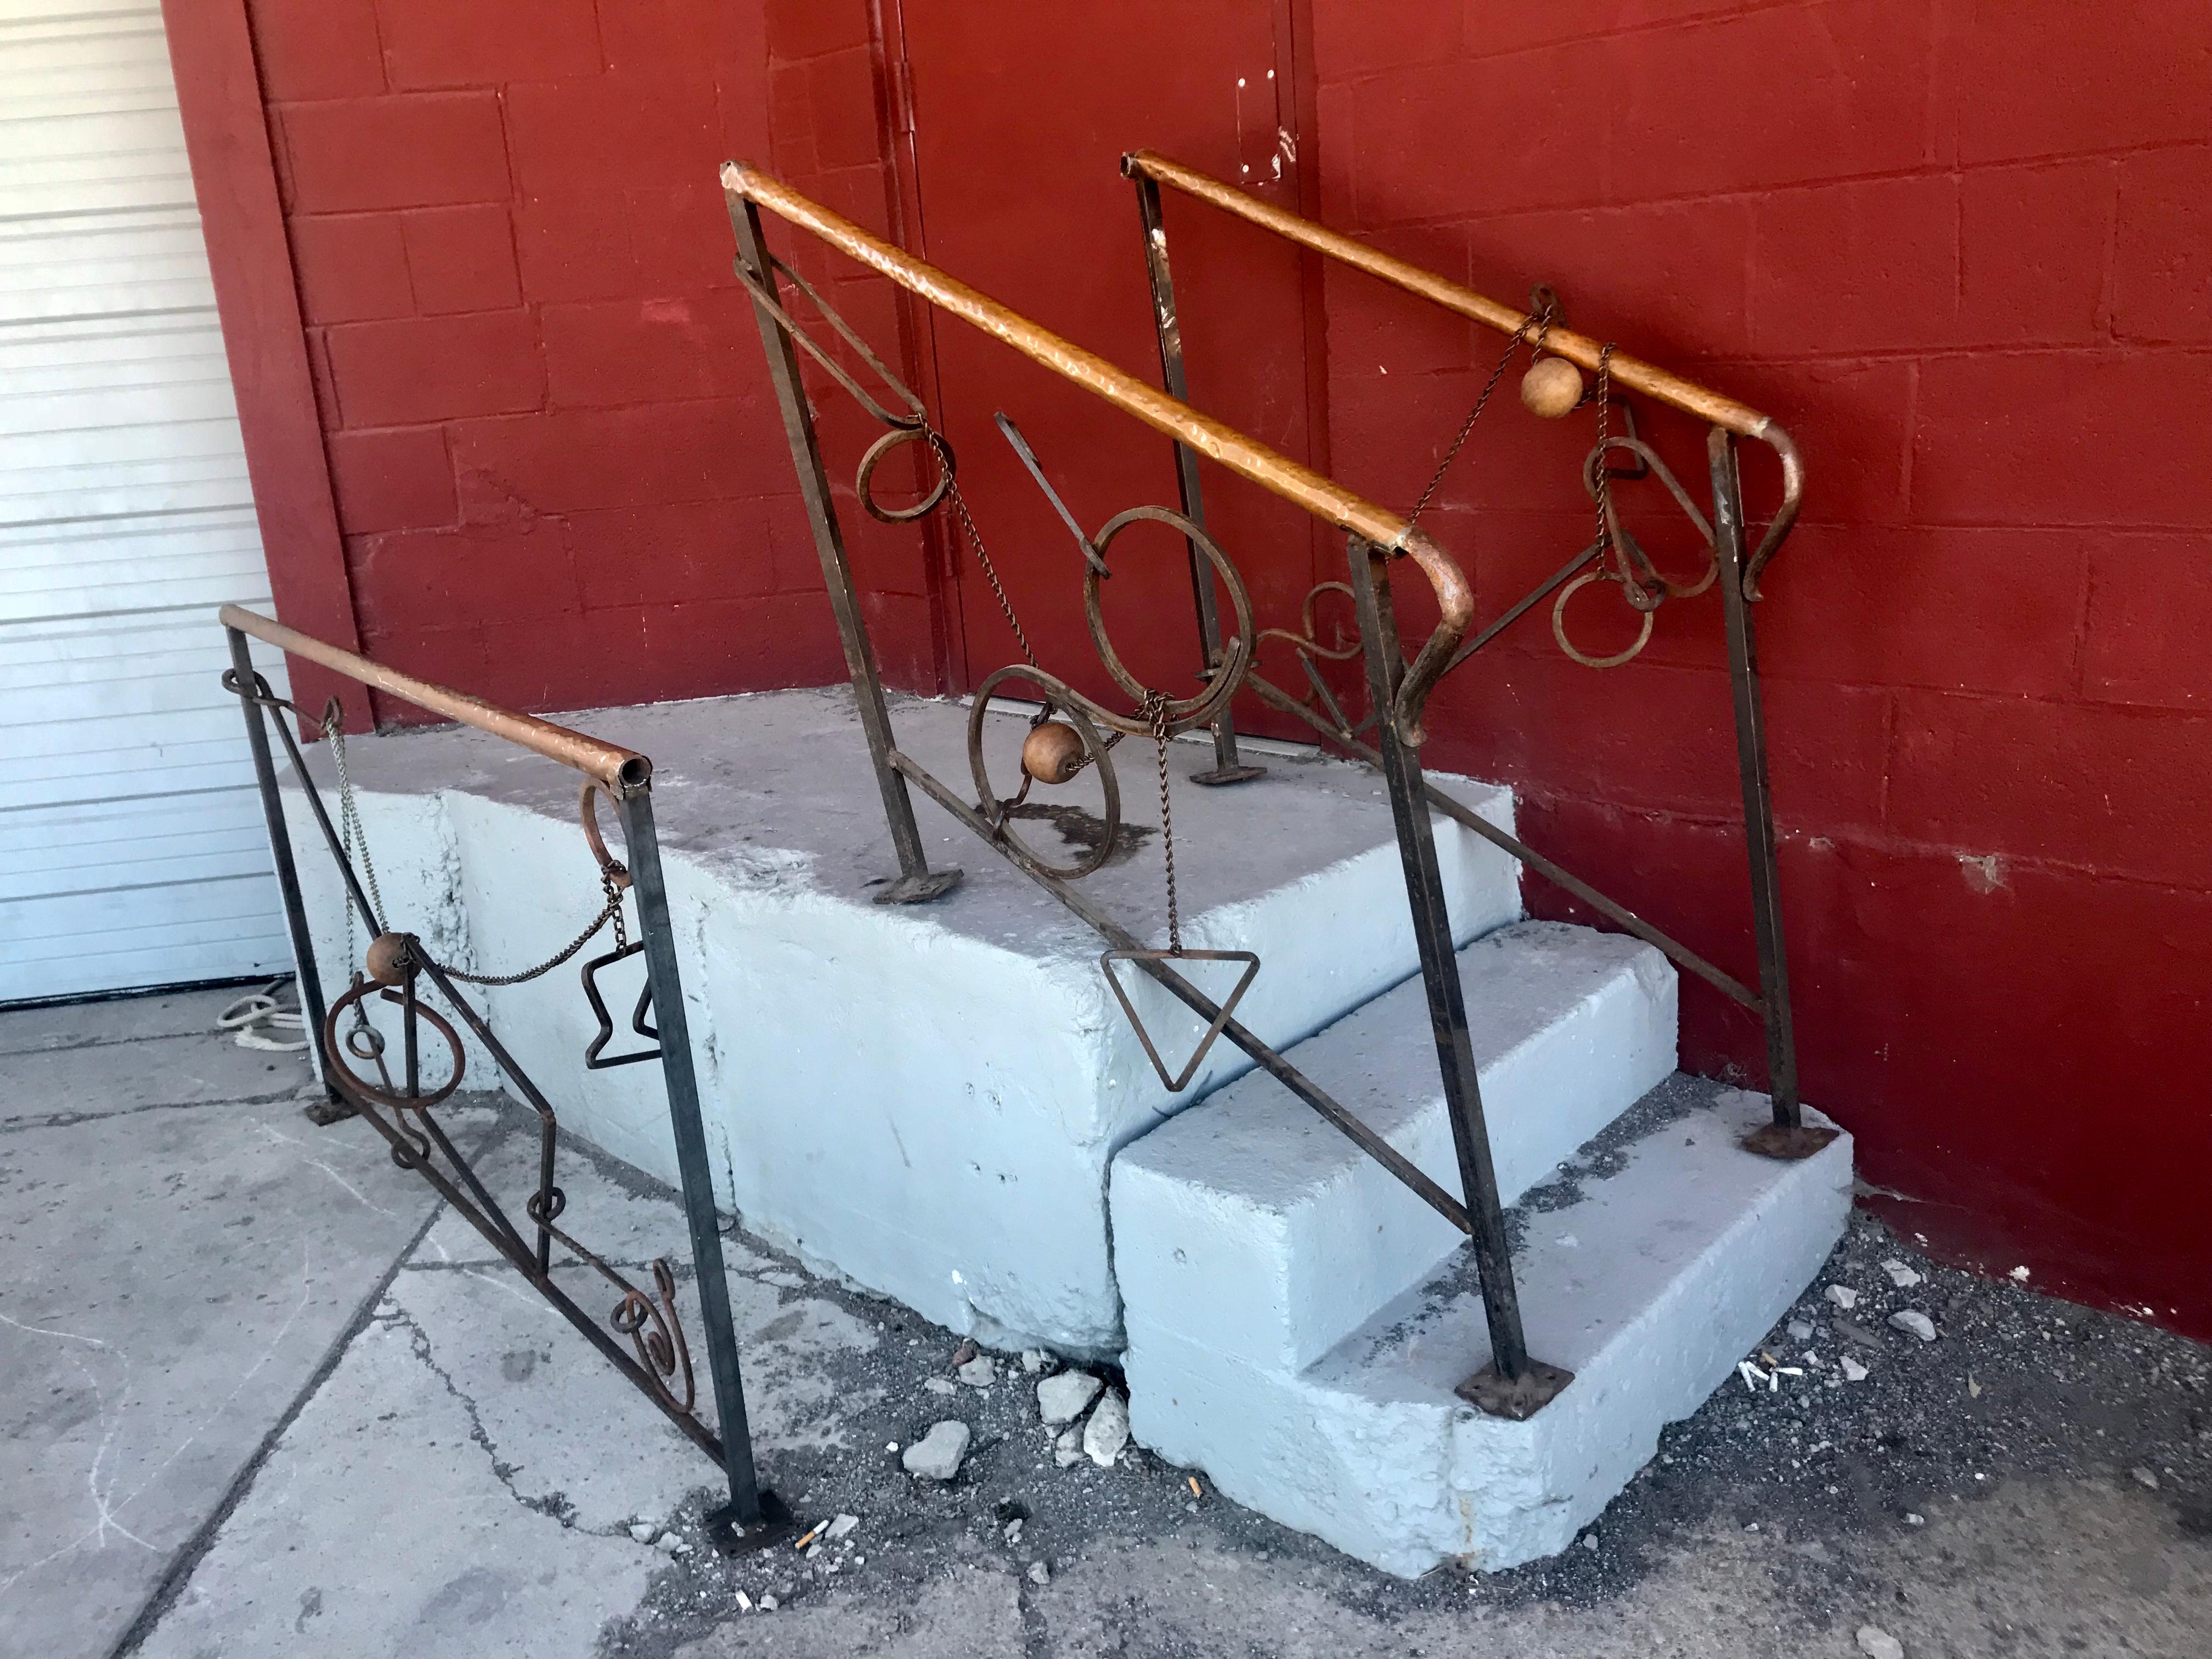 Handmade sculptural iron, copper, bronze 4 piece railings, by Larry Griffis Jr. Stunning artistic railings originally commissioned for downtown Buffalo New York restaurant. My guess would be late 1970s, early 1980s vintage, constructed, designed and